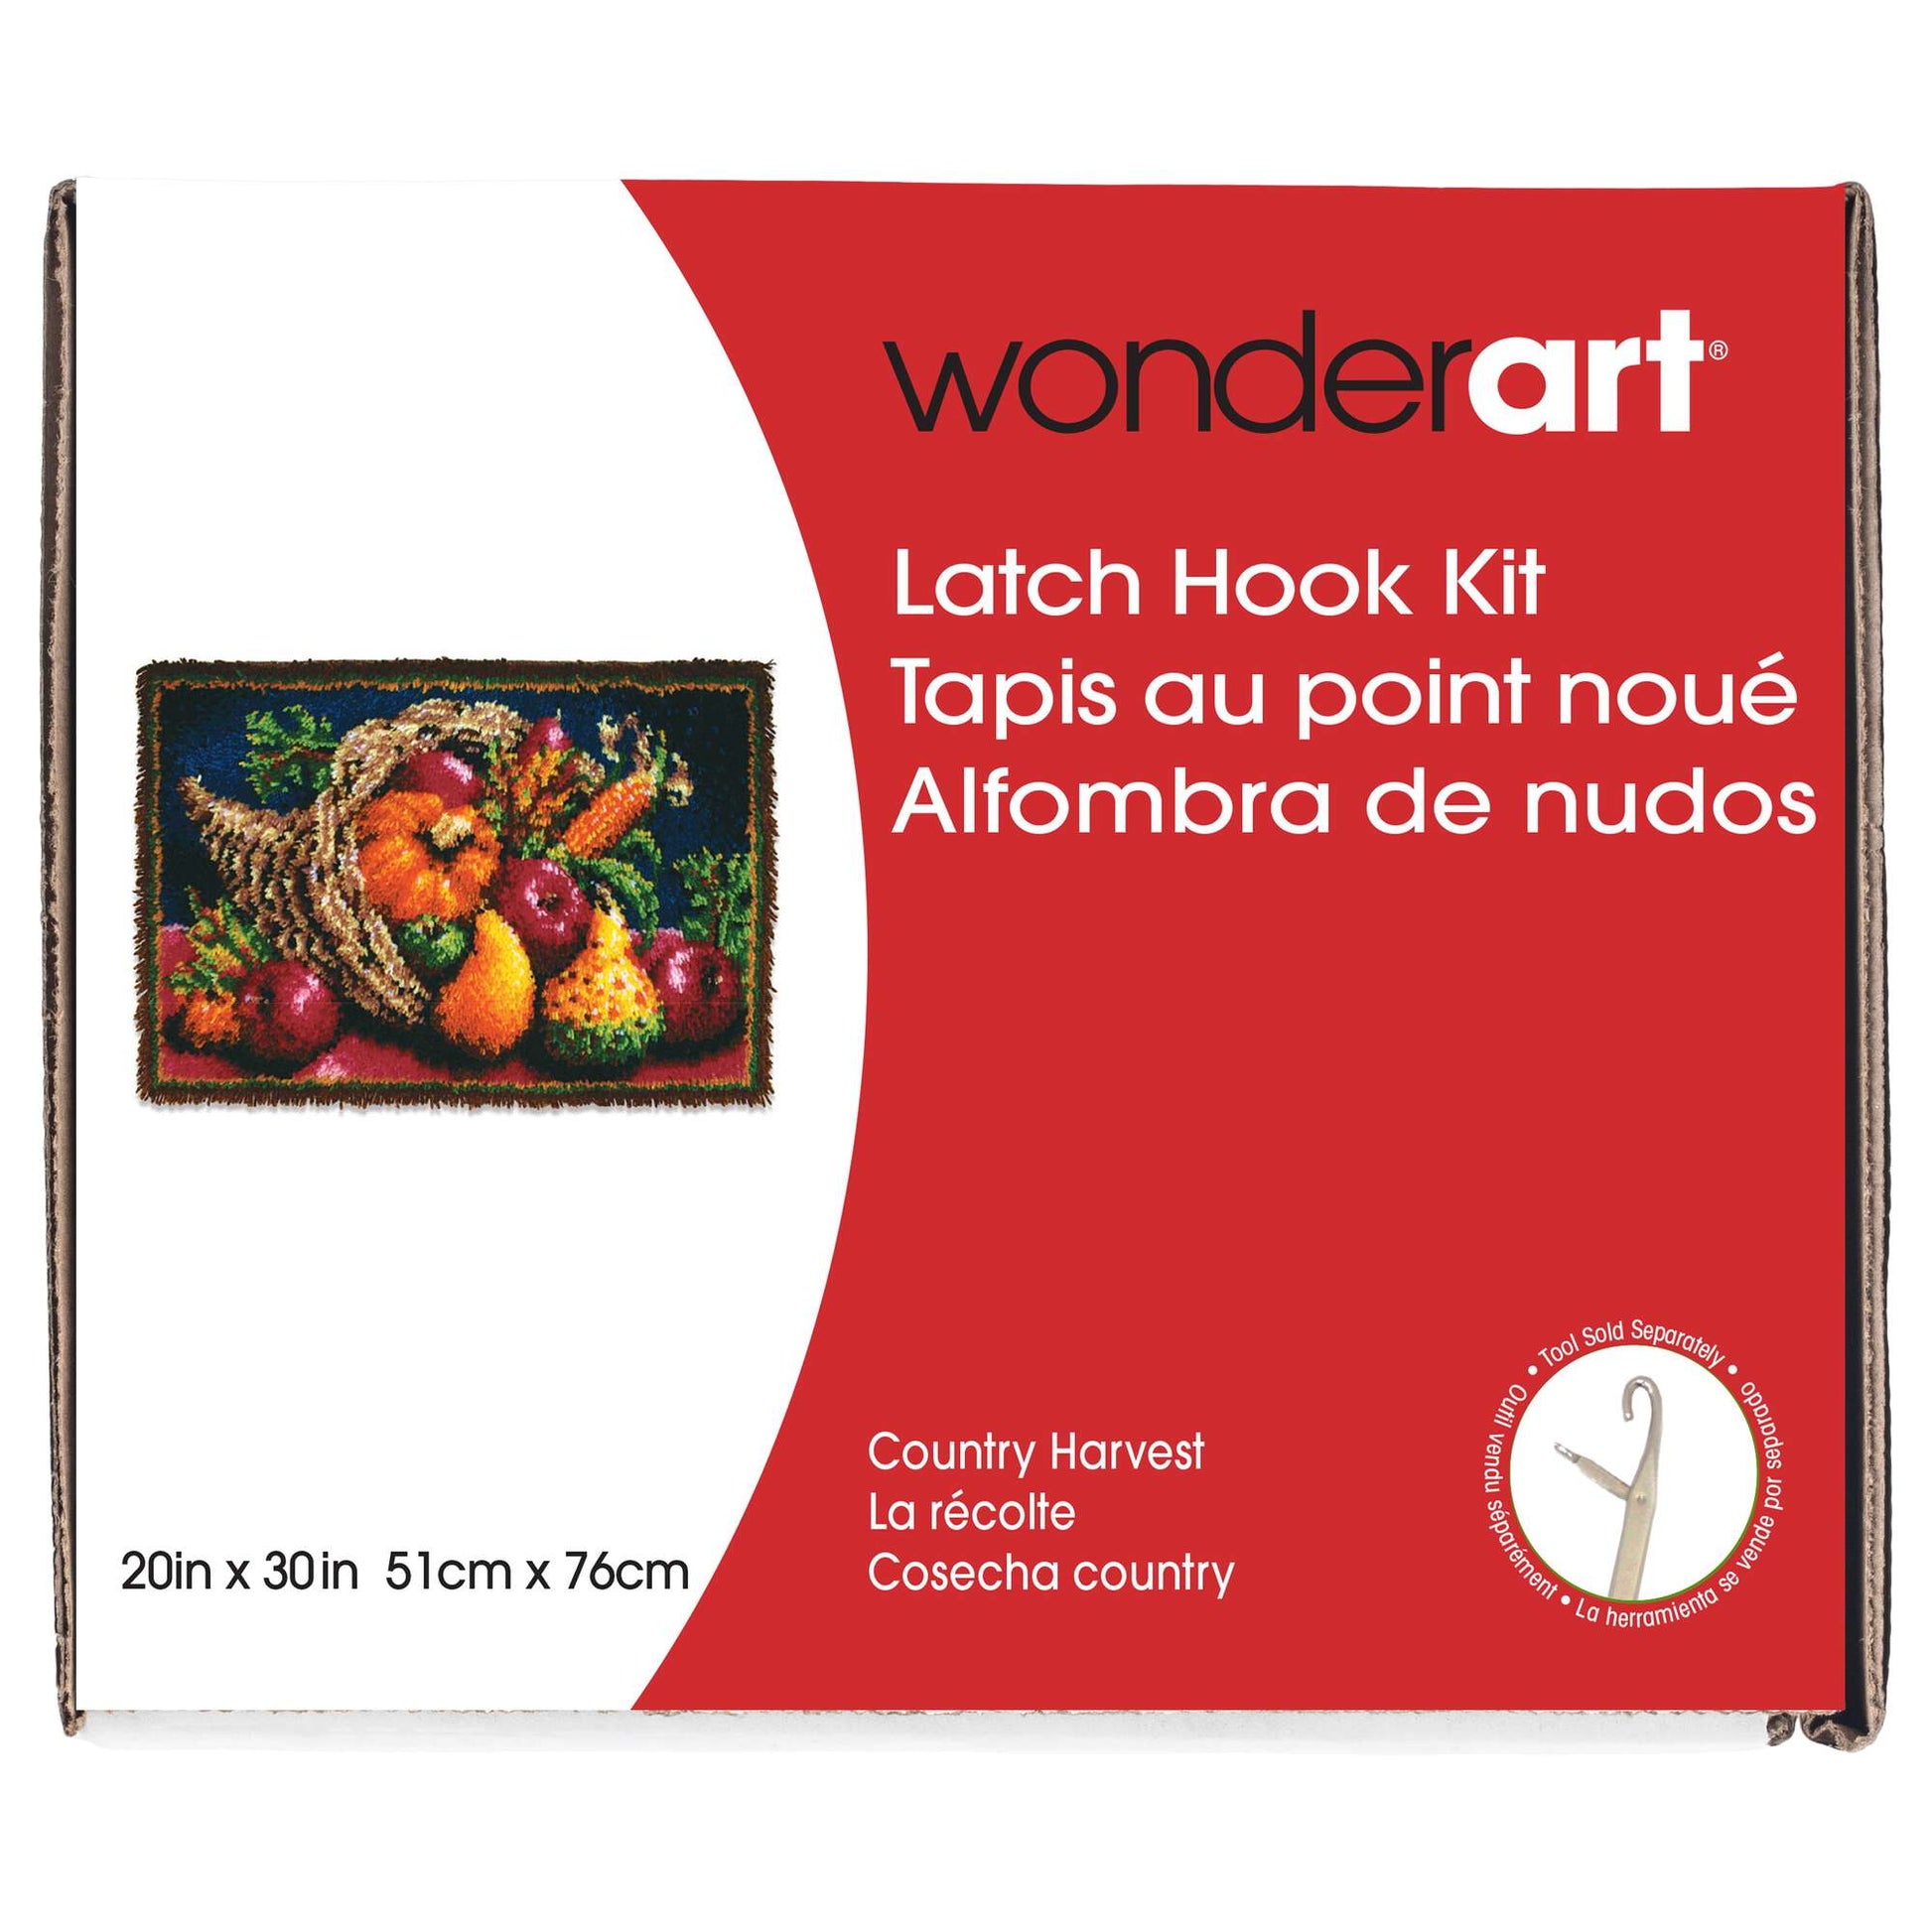 WonderArt Classic Country Harvest Kit 20" x 30" Country Harvest